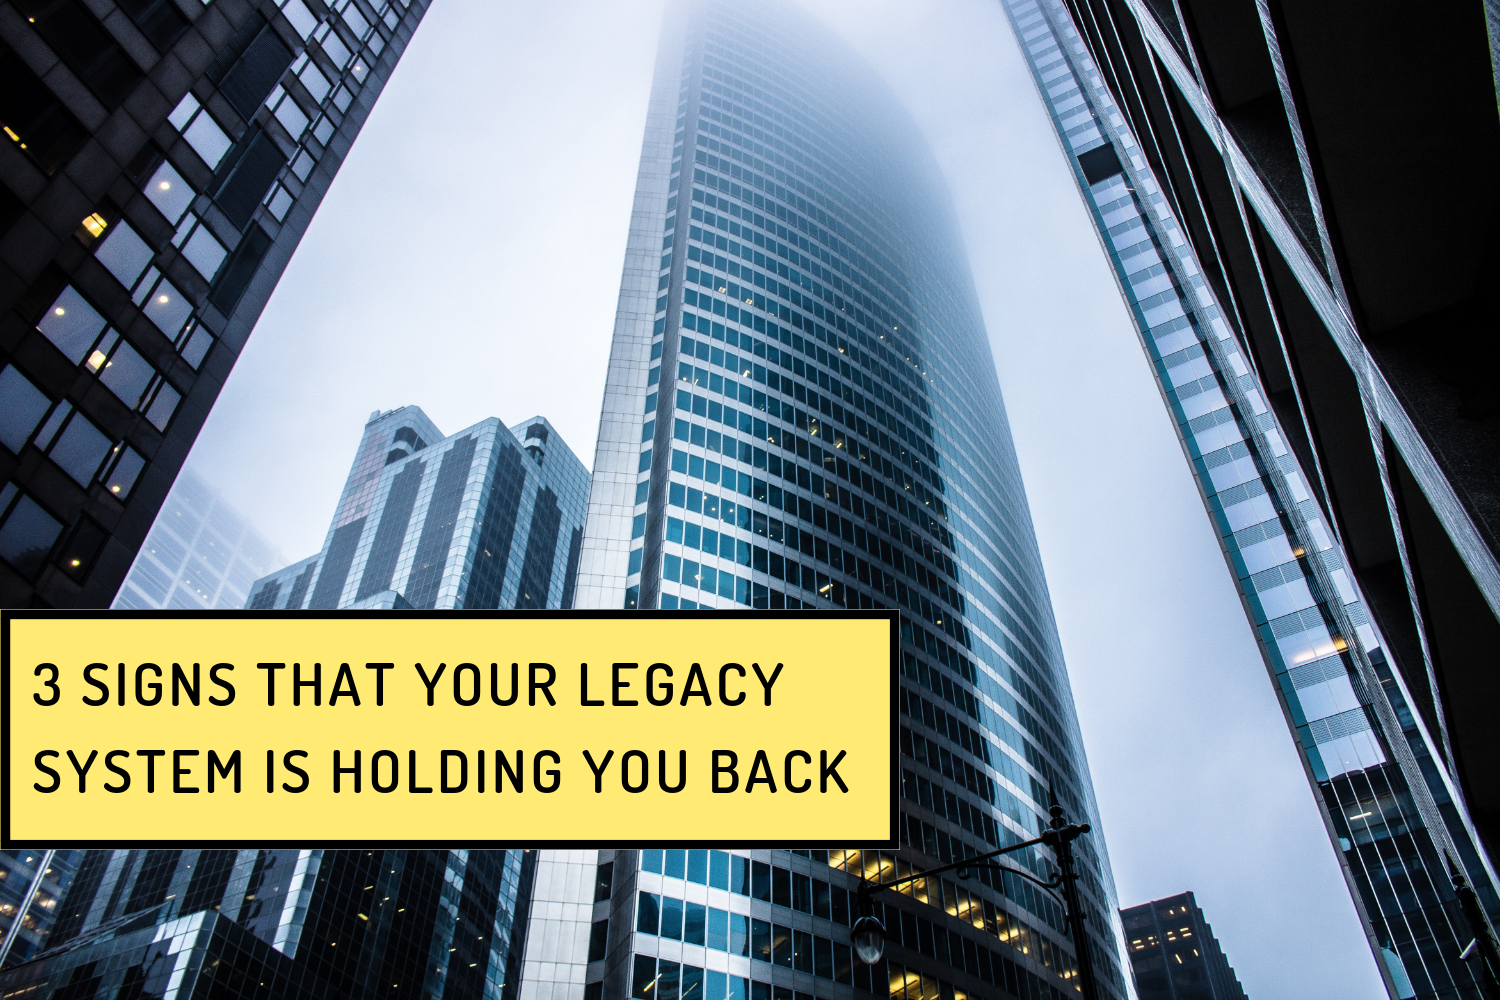 3 Signs That Your Legacy System Is Holding You Back